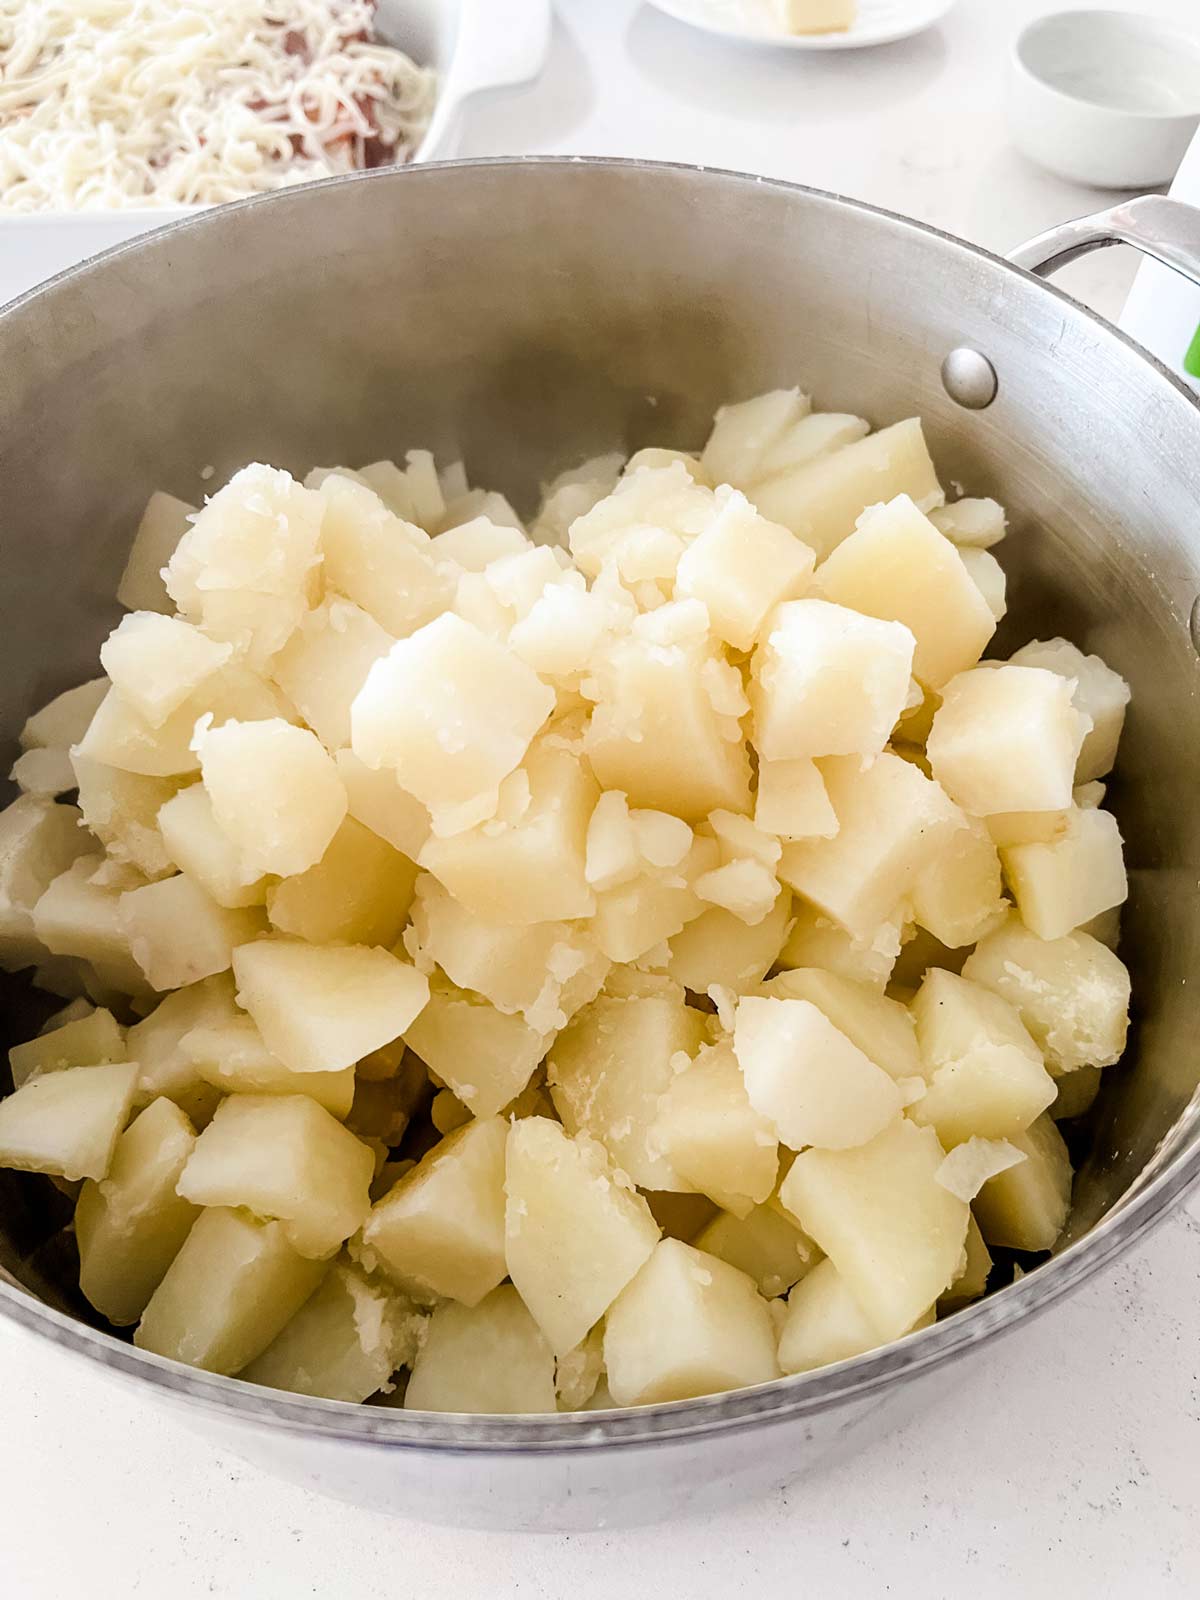 Cooked diced potatoes in a pot.